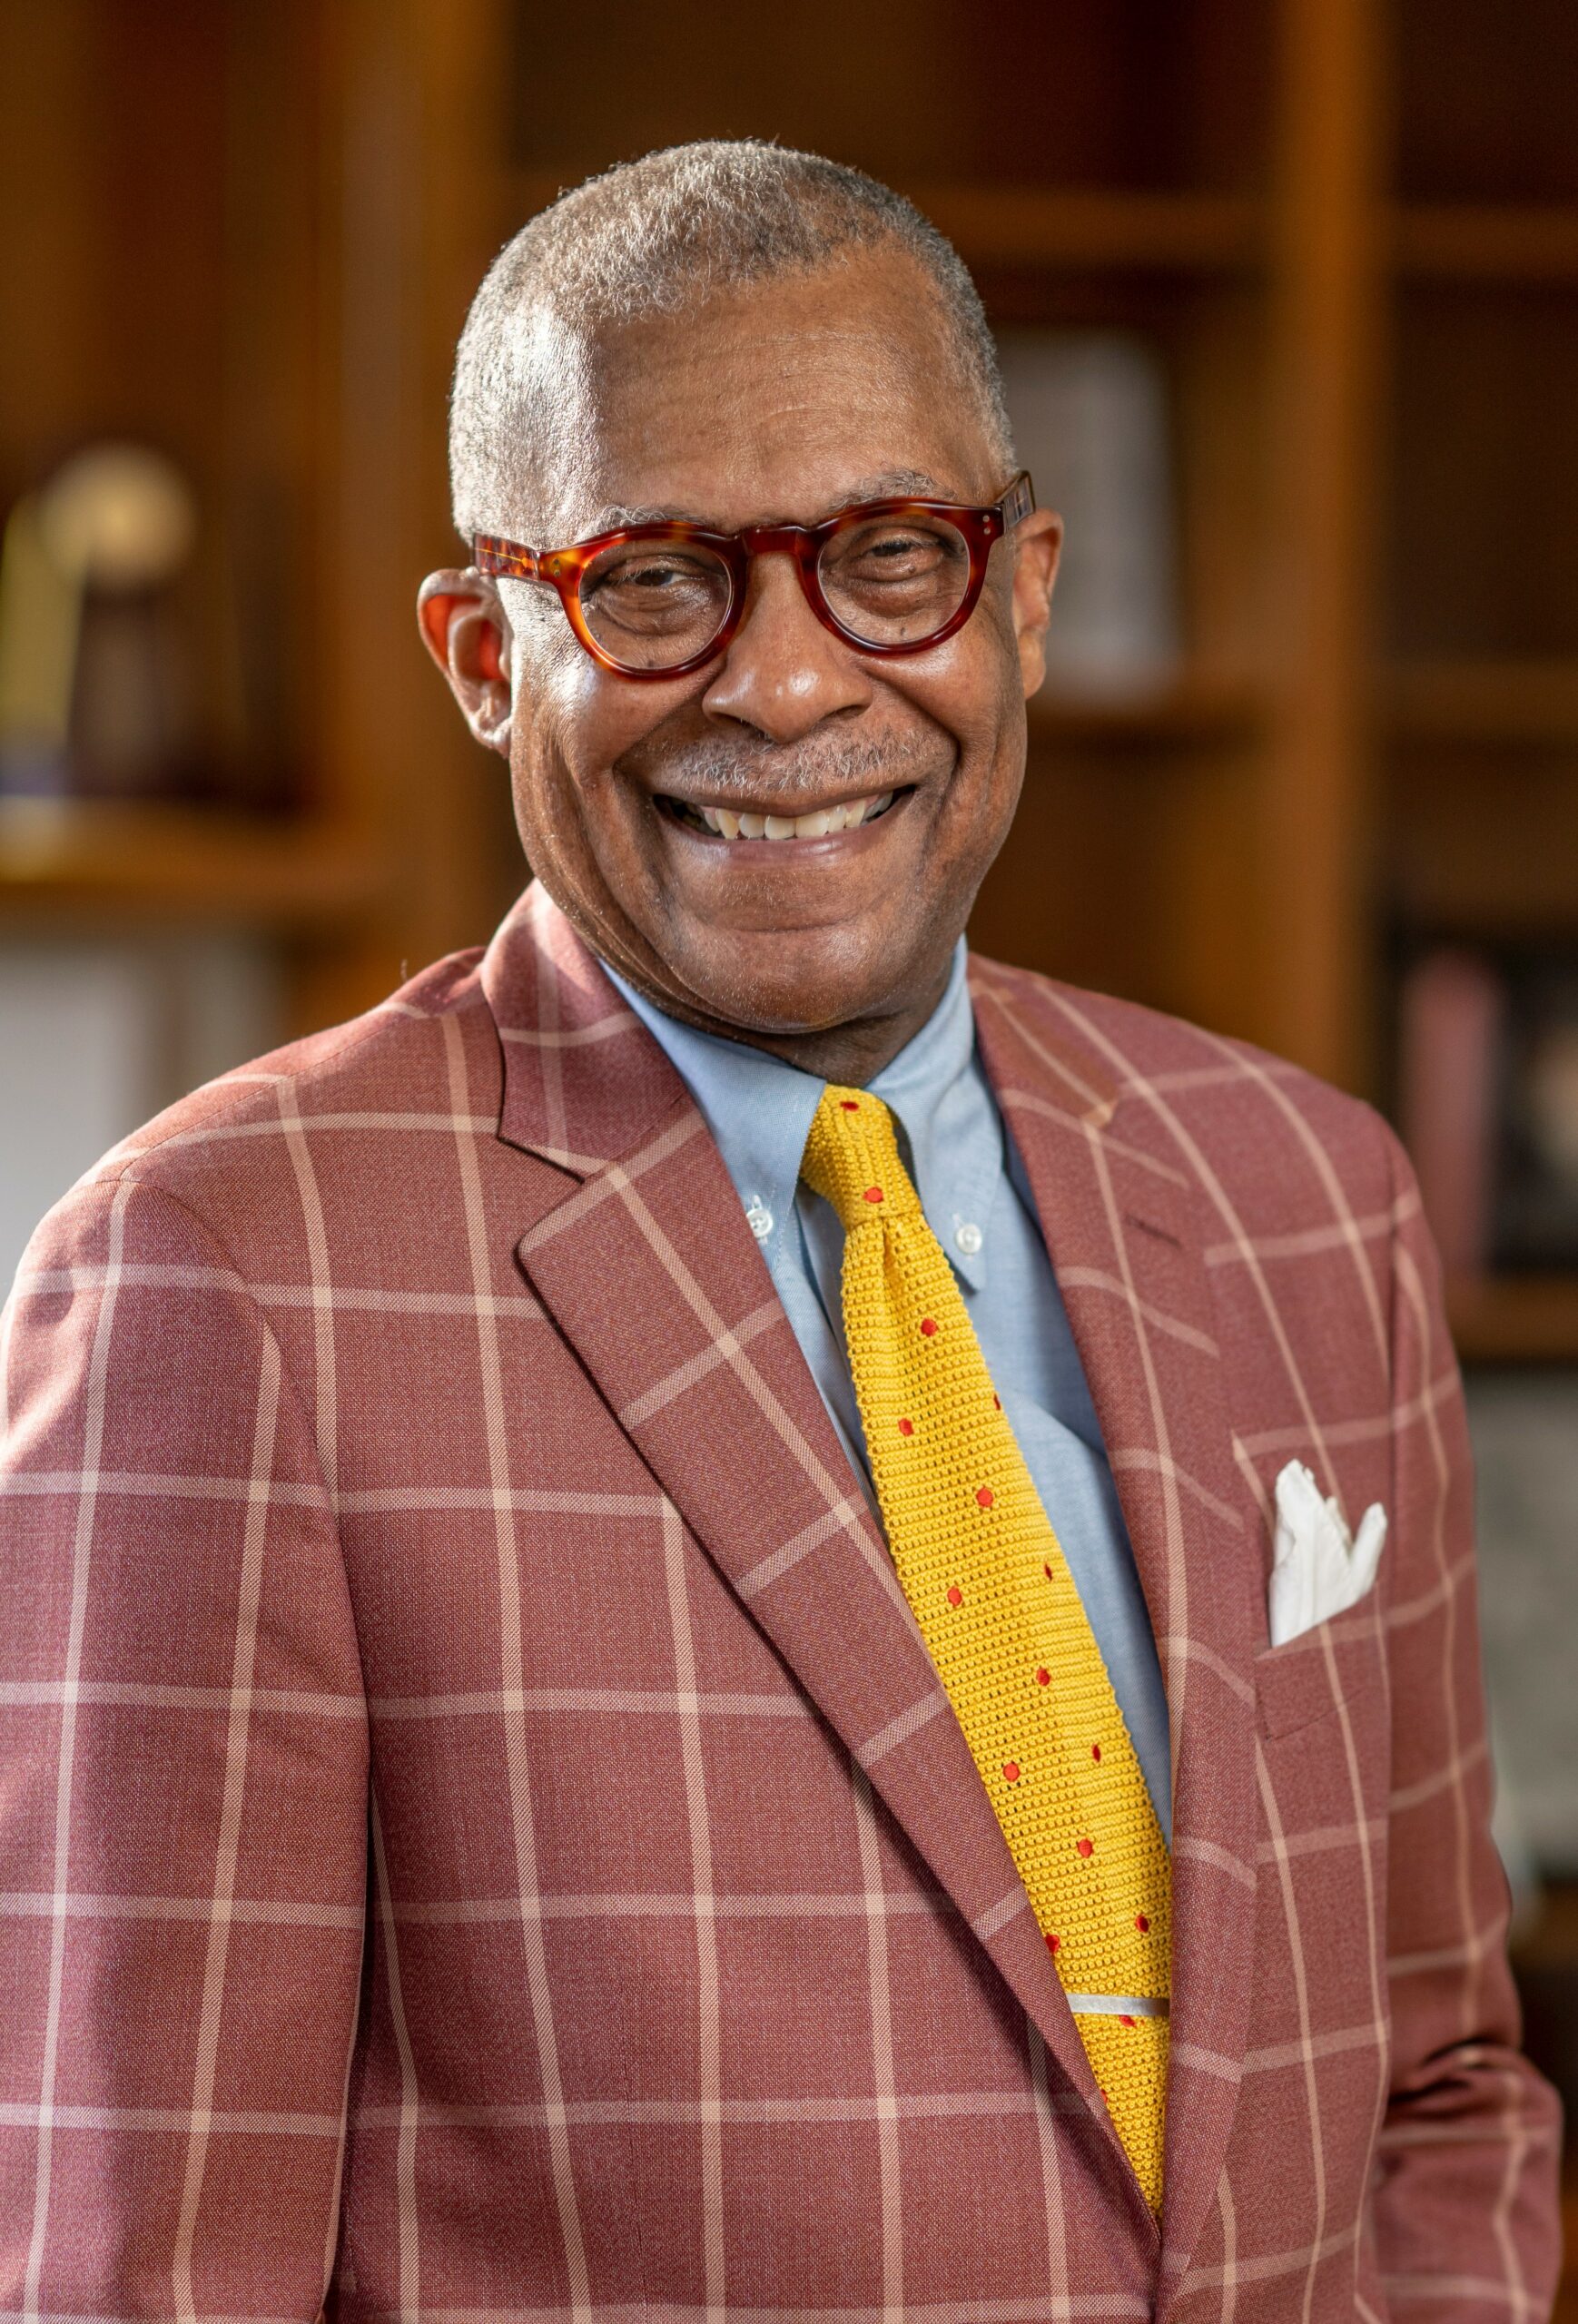 Dr. André Churchwell - Vice Chancellor for Equity,Diversity and Inclusion.